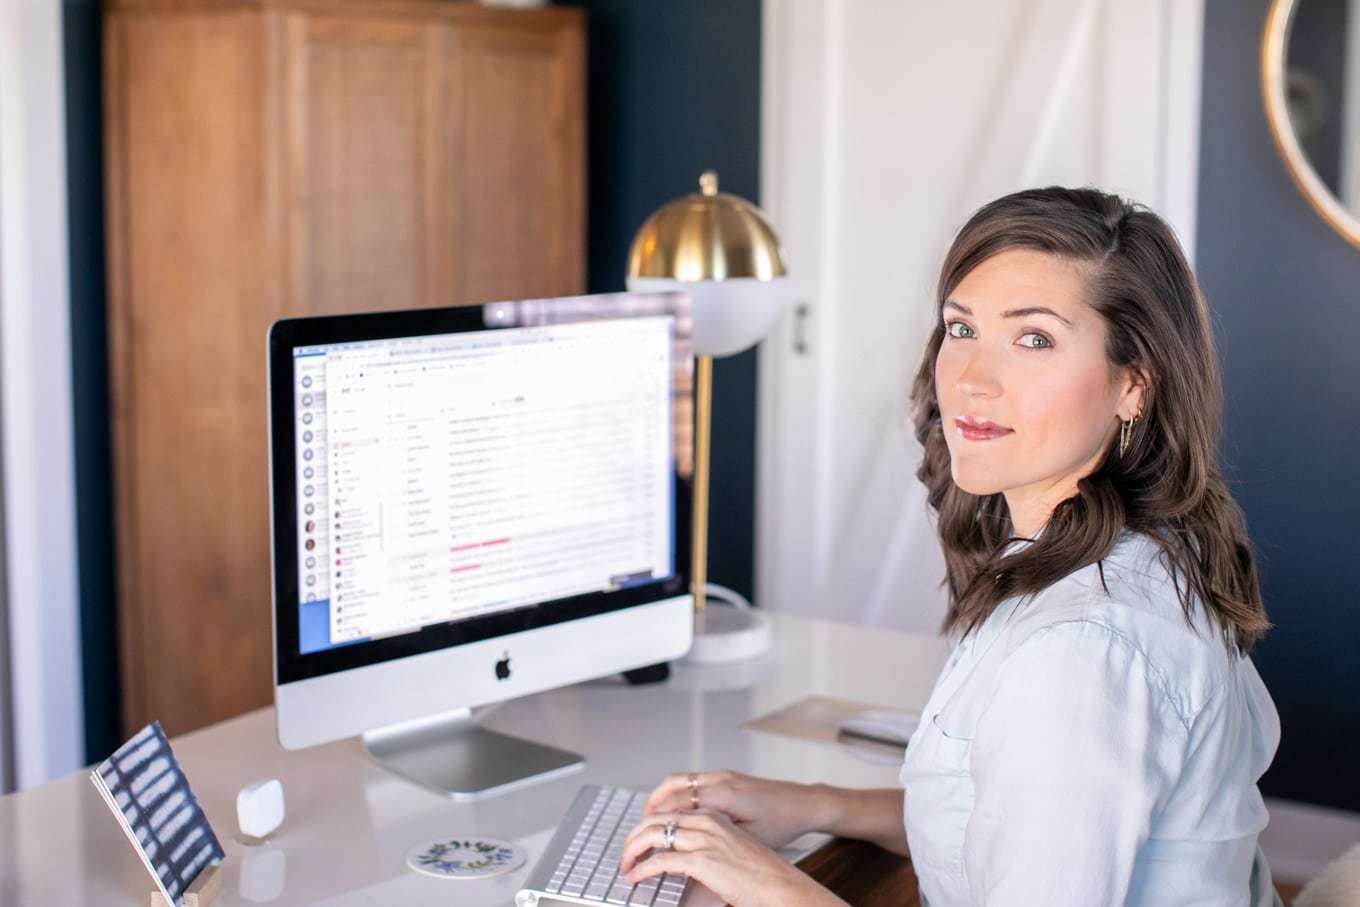 Kate Kordsmeier, a woman with brown hair sitting at her desk in front of a desktop computer.